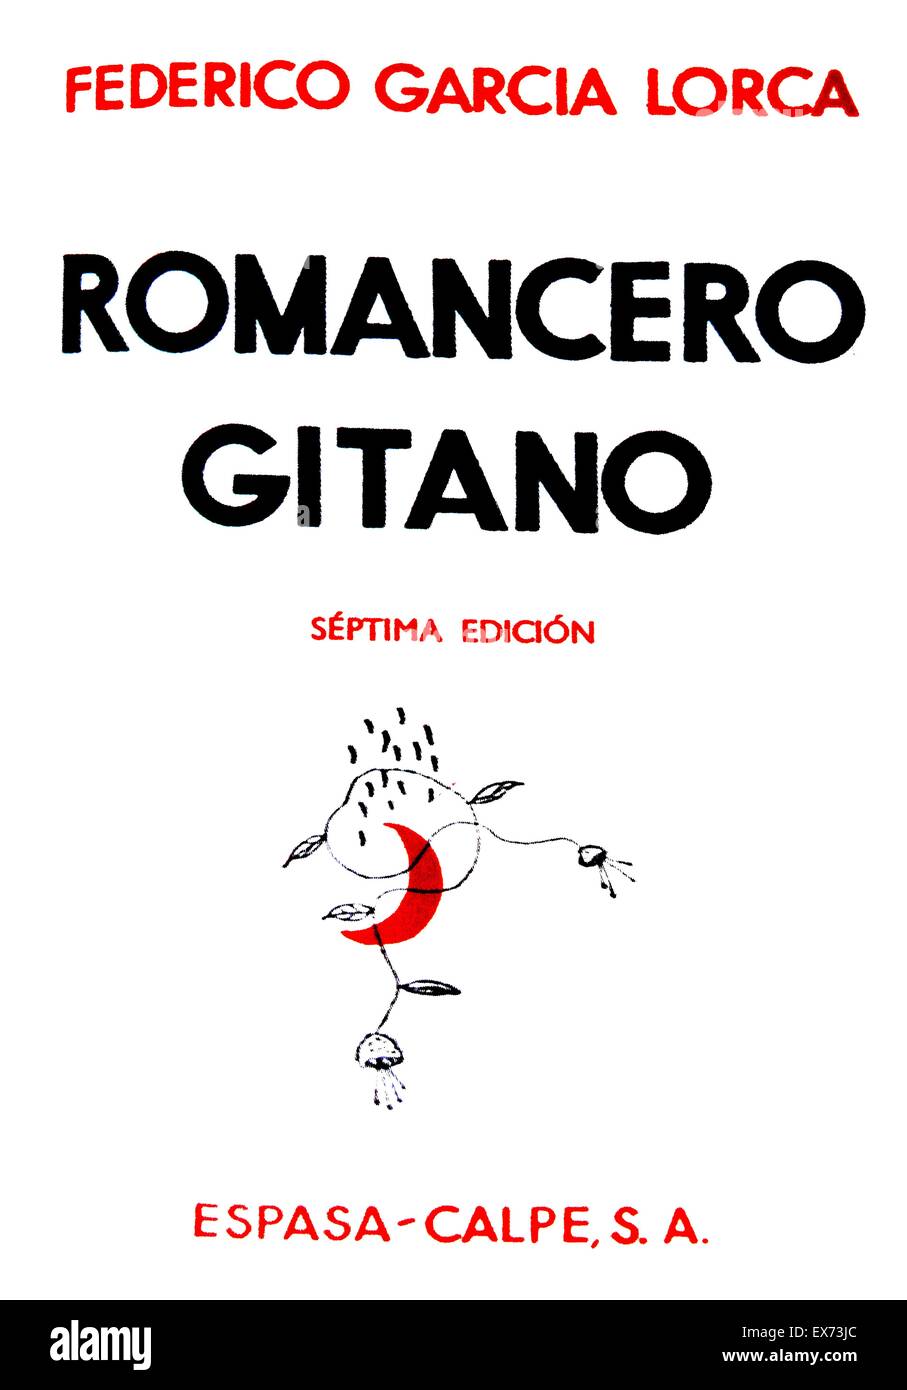 1937 edition of 'Romancero Gitano' by Federico García Lorca, (1898 – 19 August 1936). Lorca was a Spanish poet, executed by Nationalist forces during the Spanish Civil War. He published poetry collections including Romancero Gitano (Gypsy Ballads, 1928), Stock Photo